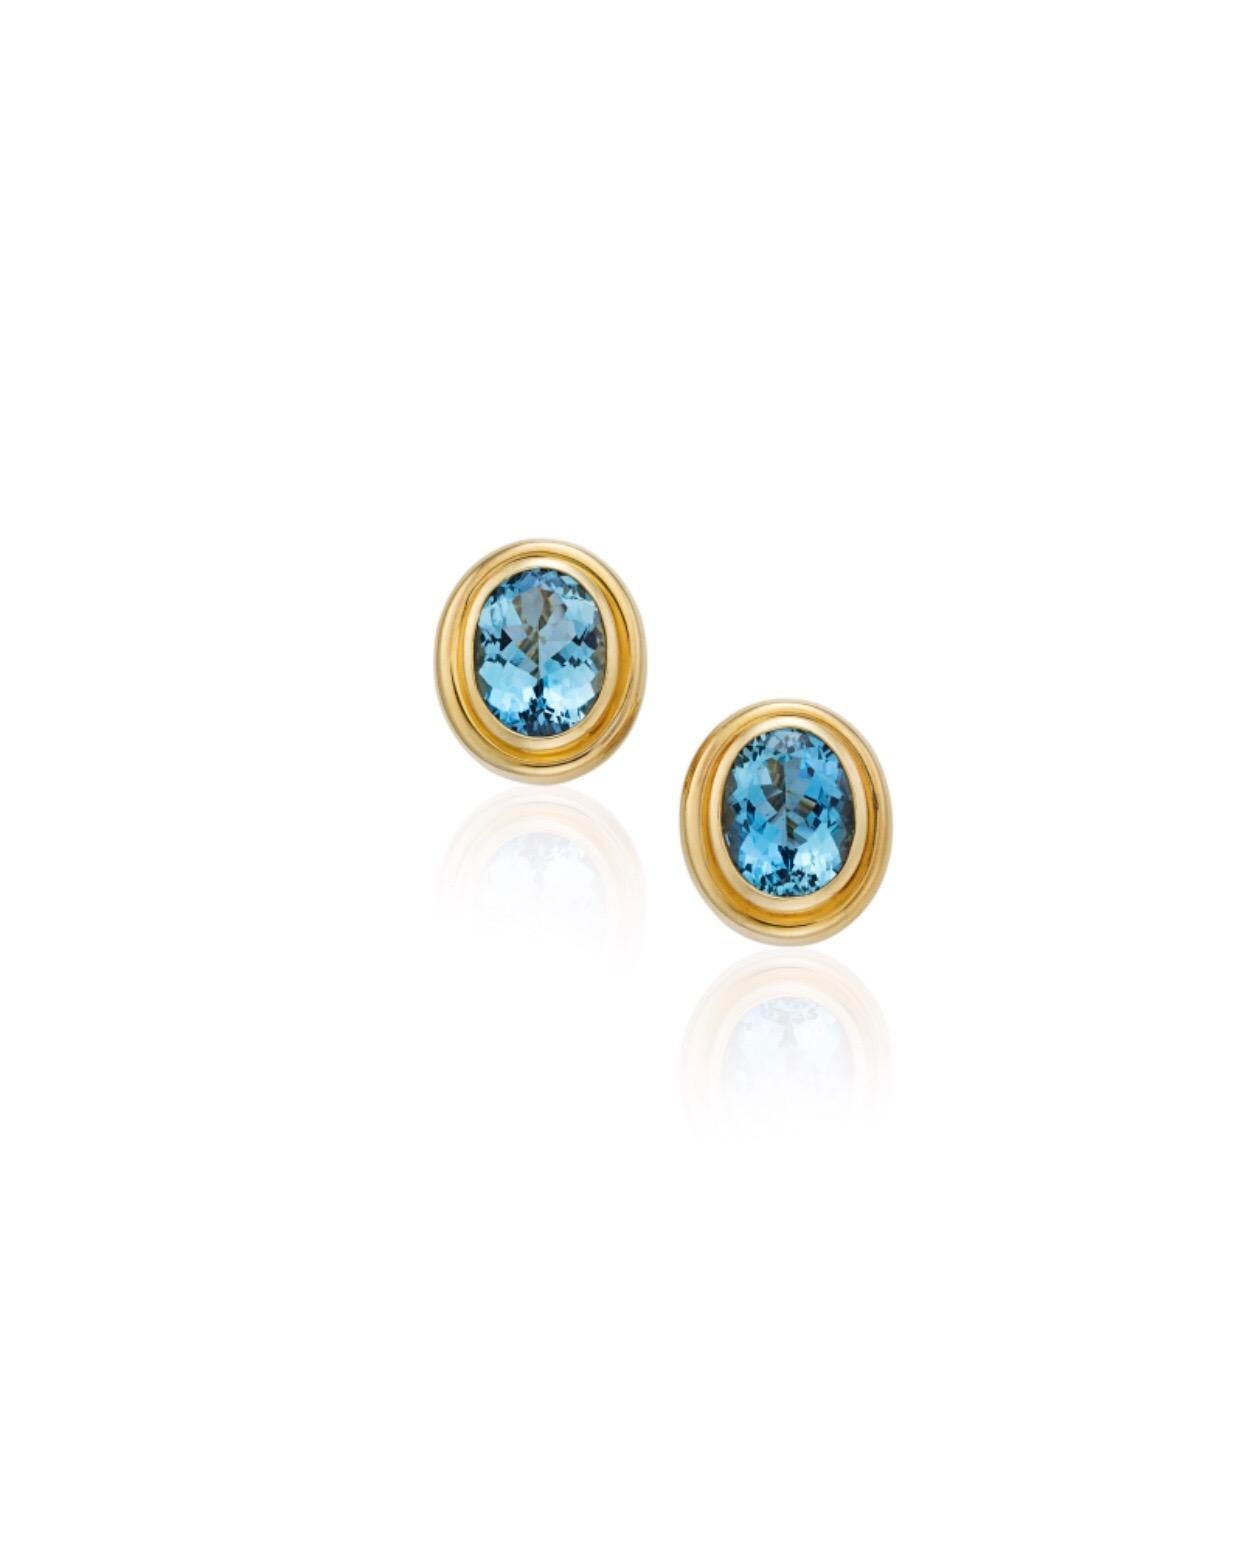 Stunning TIFFANY & CO. PALOMA PICASSO AQUAMARINE EARRINGS

Vibrant oval-cut aquamarine stones of the finest quality set within a gold frame. Those beautiful earrings were designed by Paloma Picasso and created by the famous jewellers Tiffany &